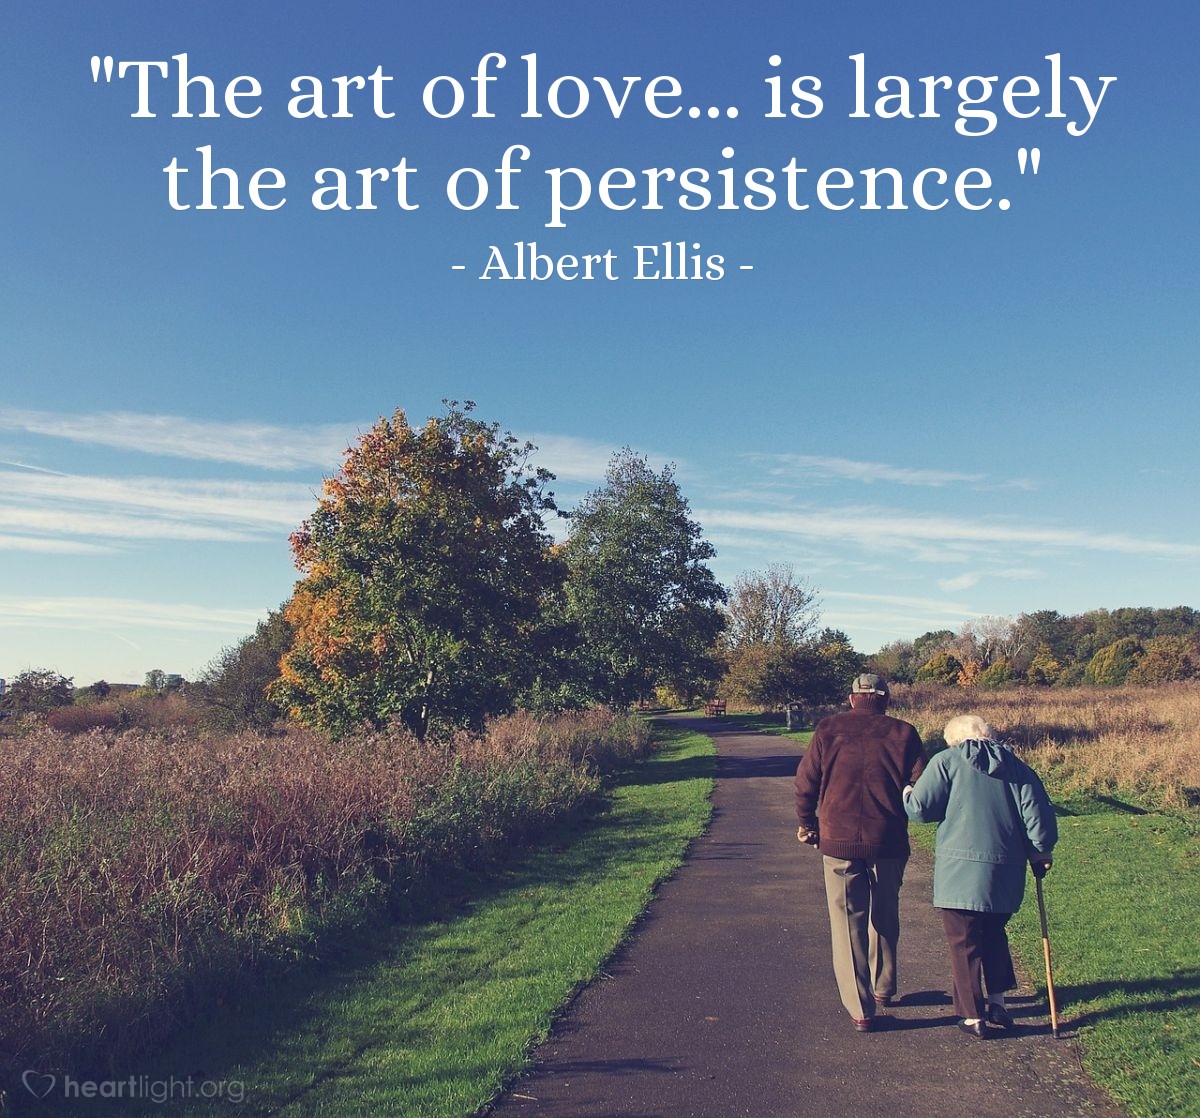 Illustration of Albert Ellis — "The art of love... is largely the art of persistence."